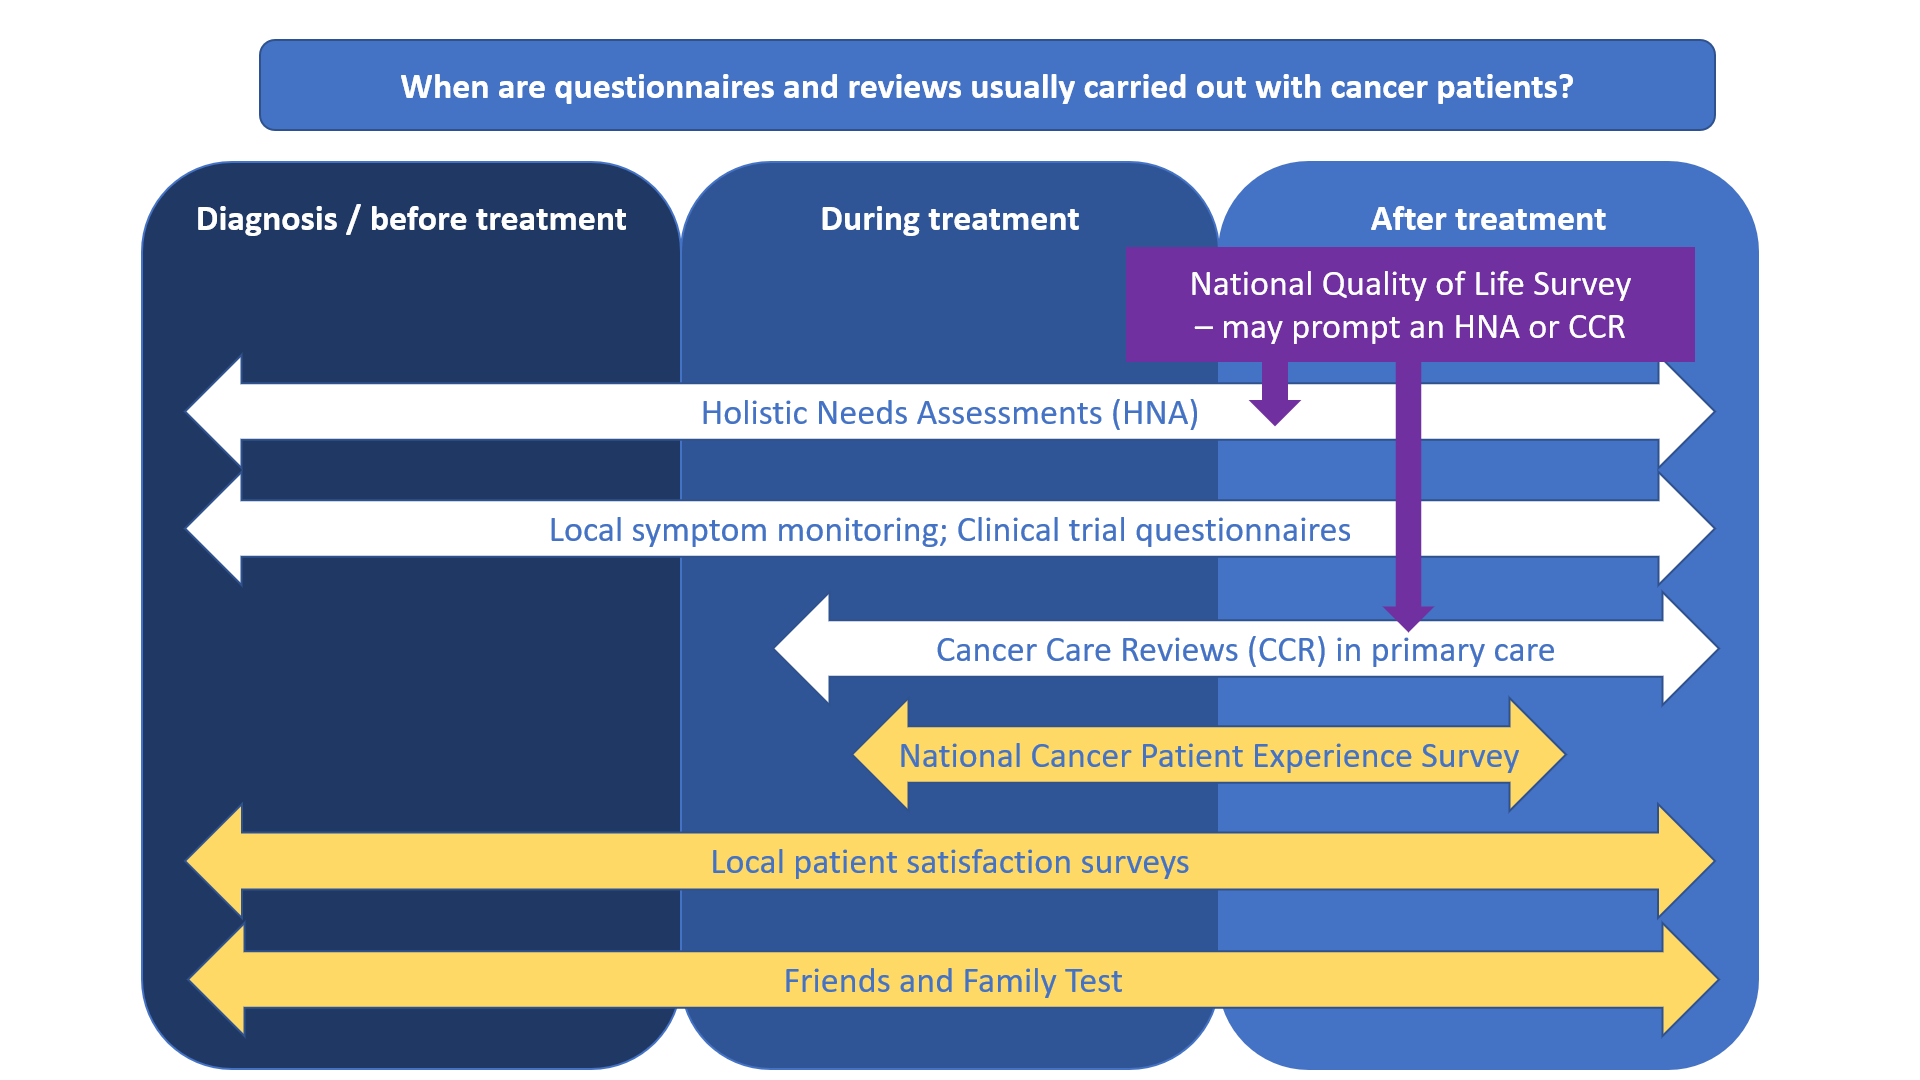 Timeline for questionnaires and reviews for cancer patients